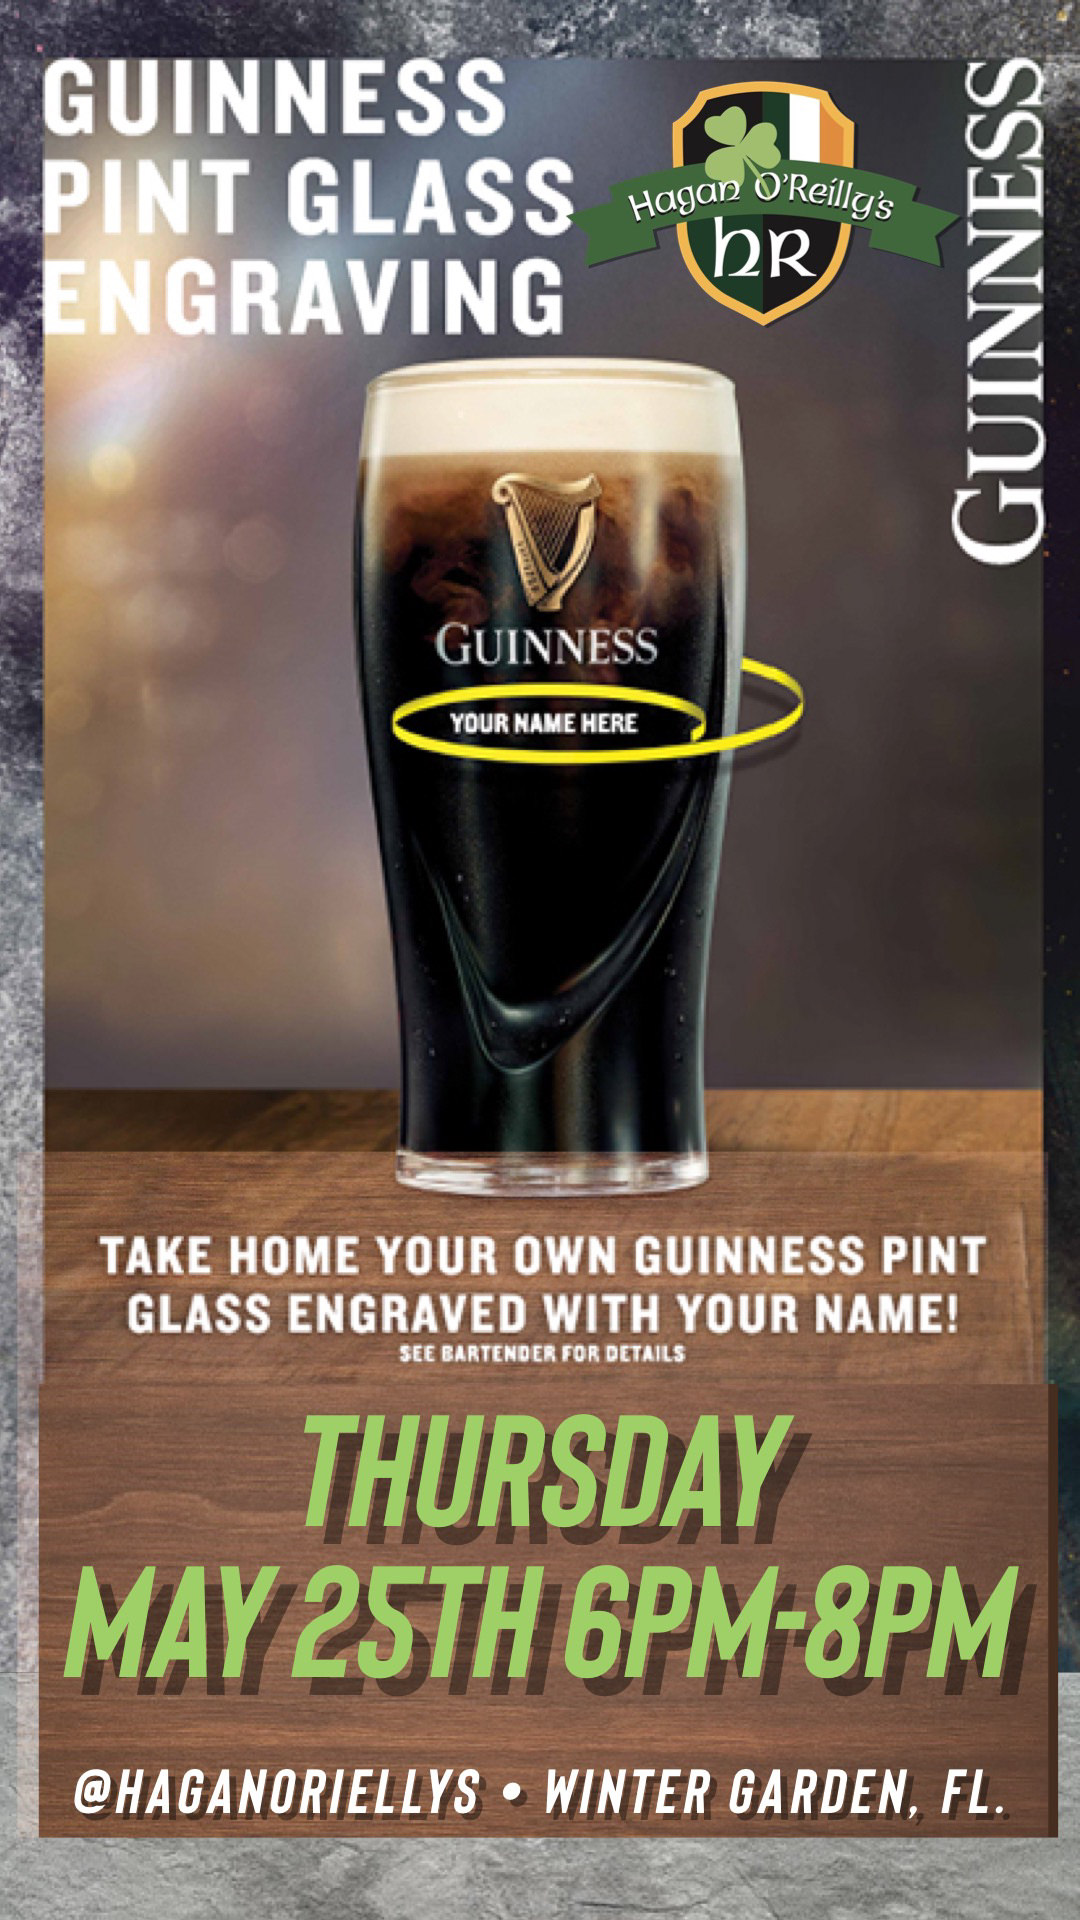 Guiness Engraving